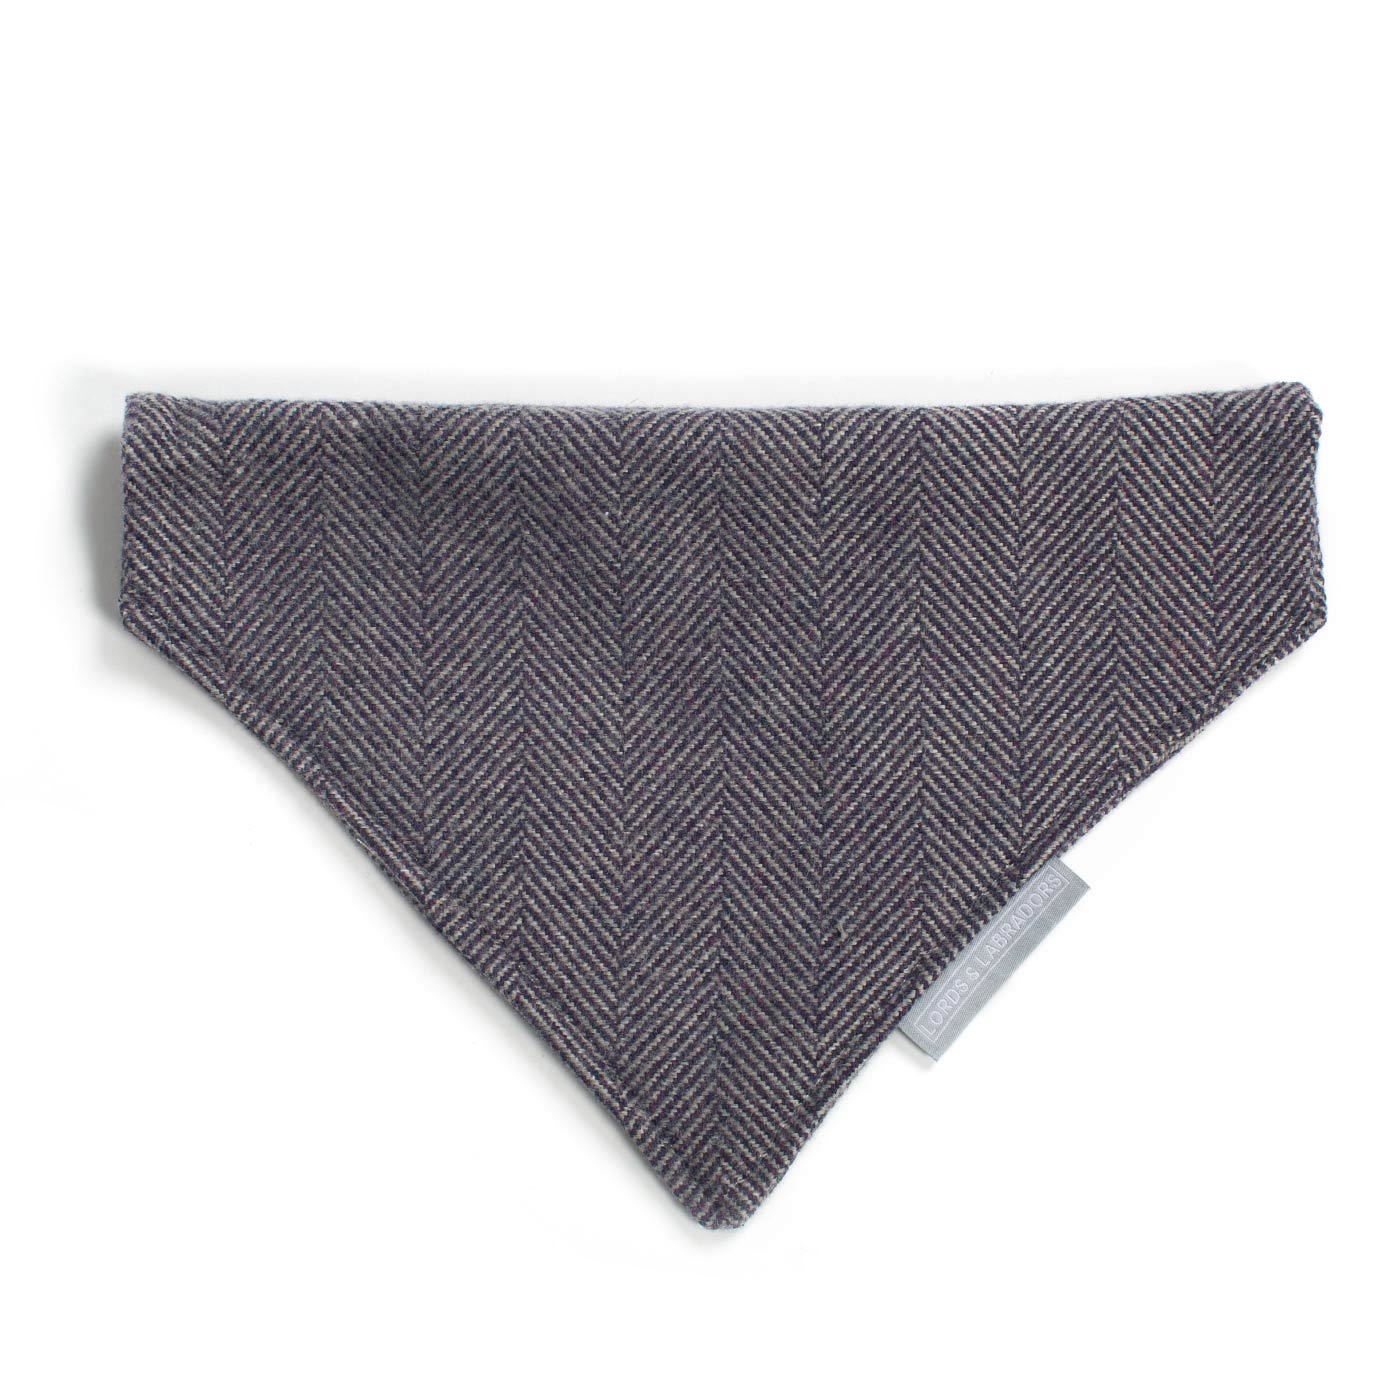 Discover The Perfect Bandana For Dogs, Handmade With love In Luxury Herringbone Tweed, Available In 3 Sizes To Personalise Now at Lords & Labradors 